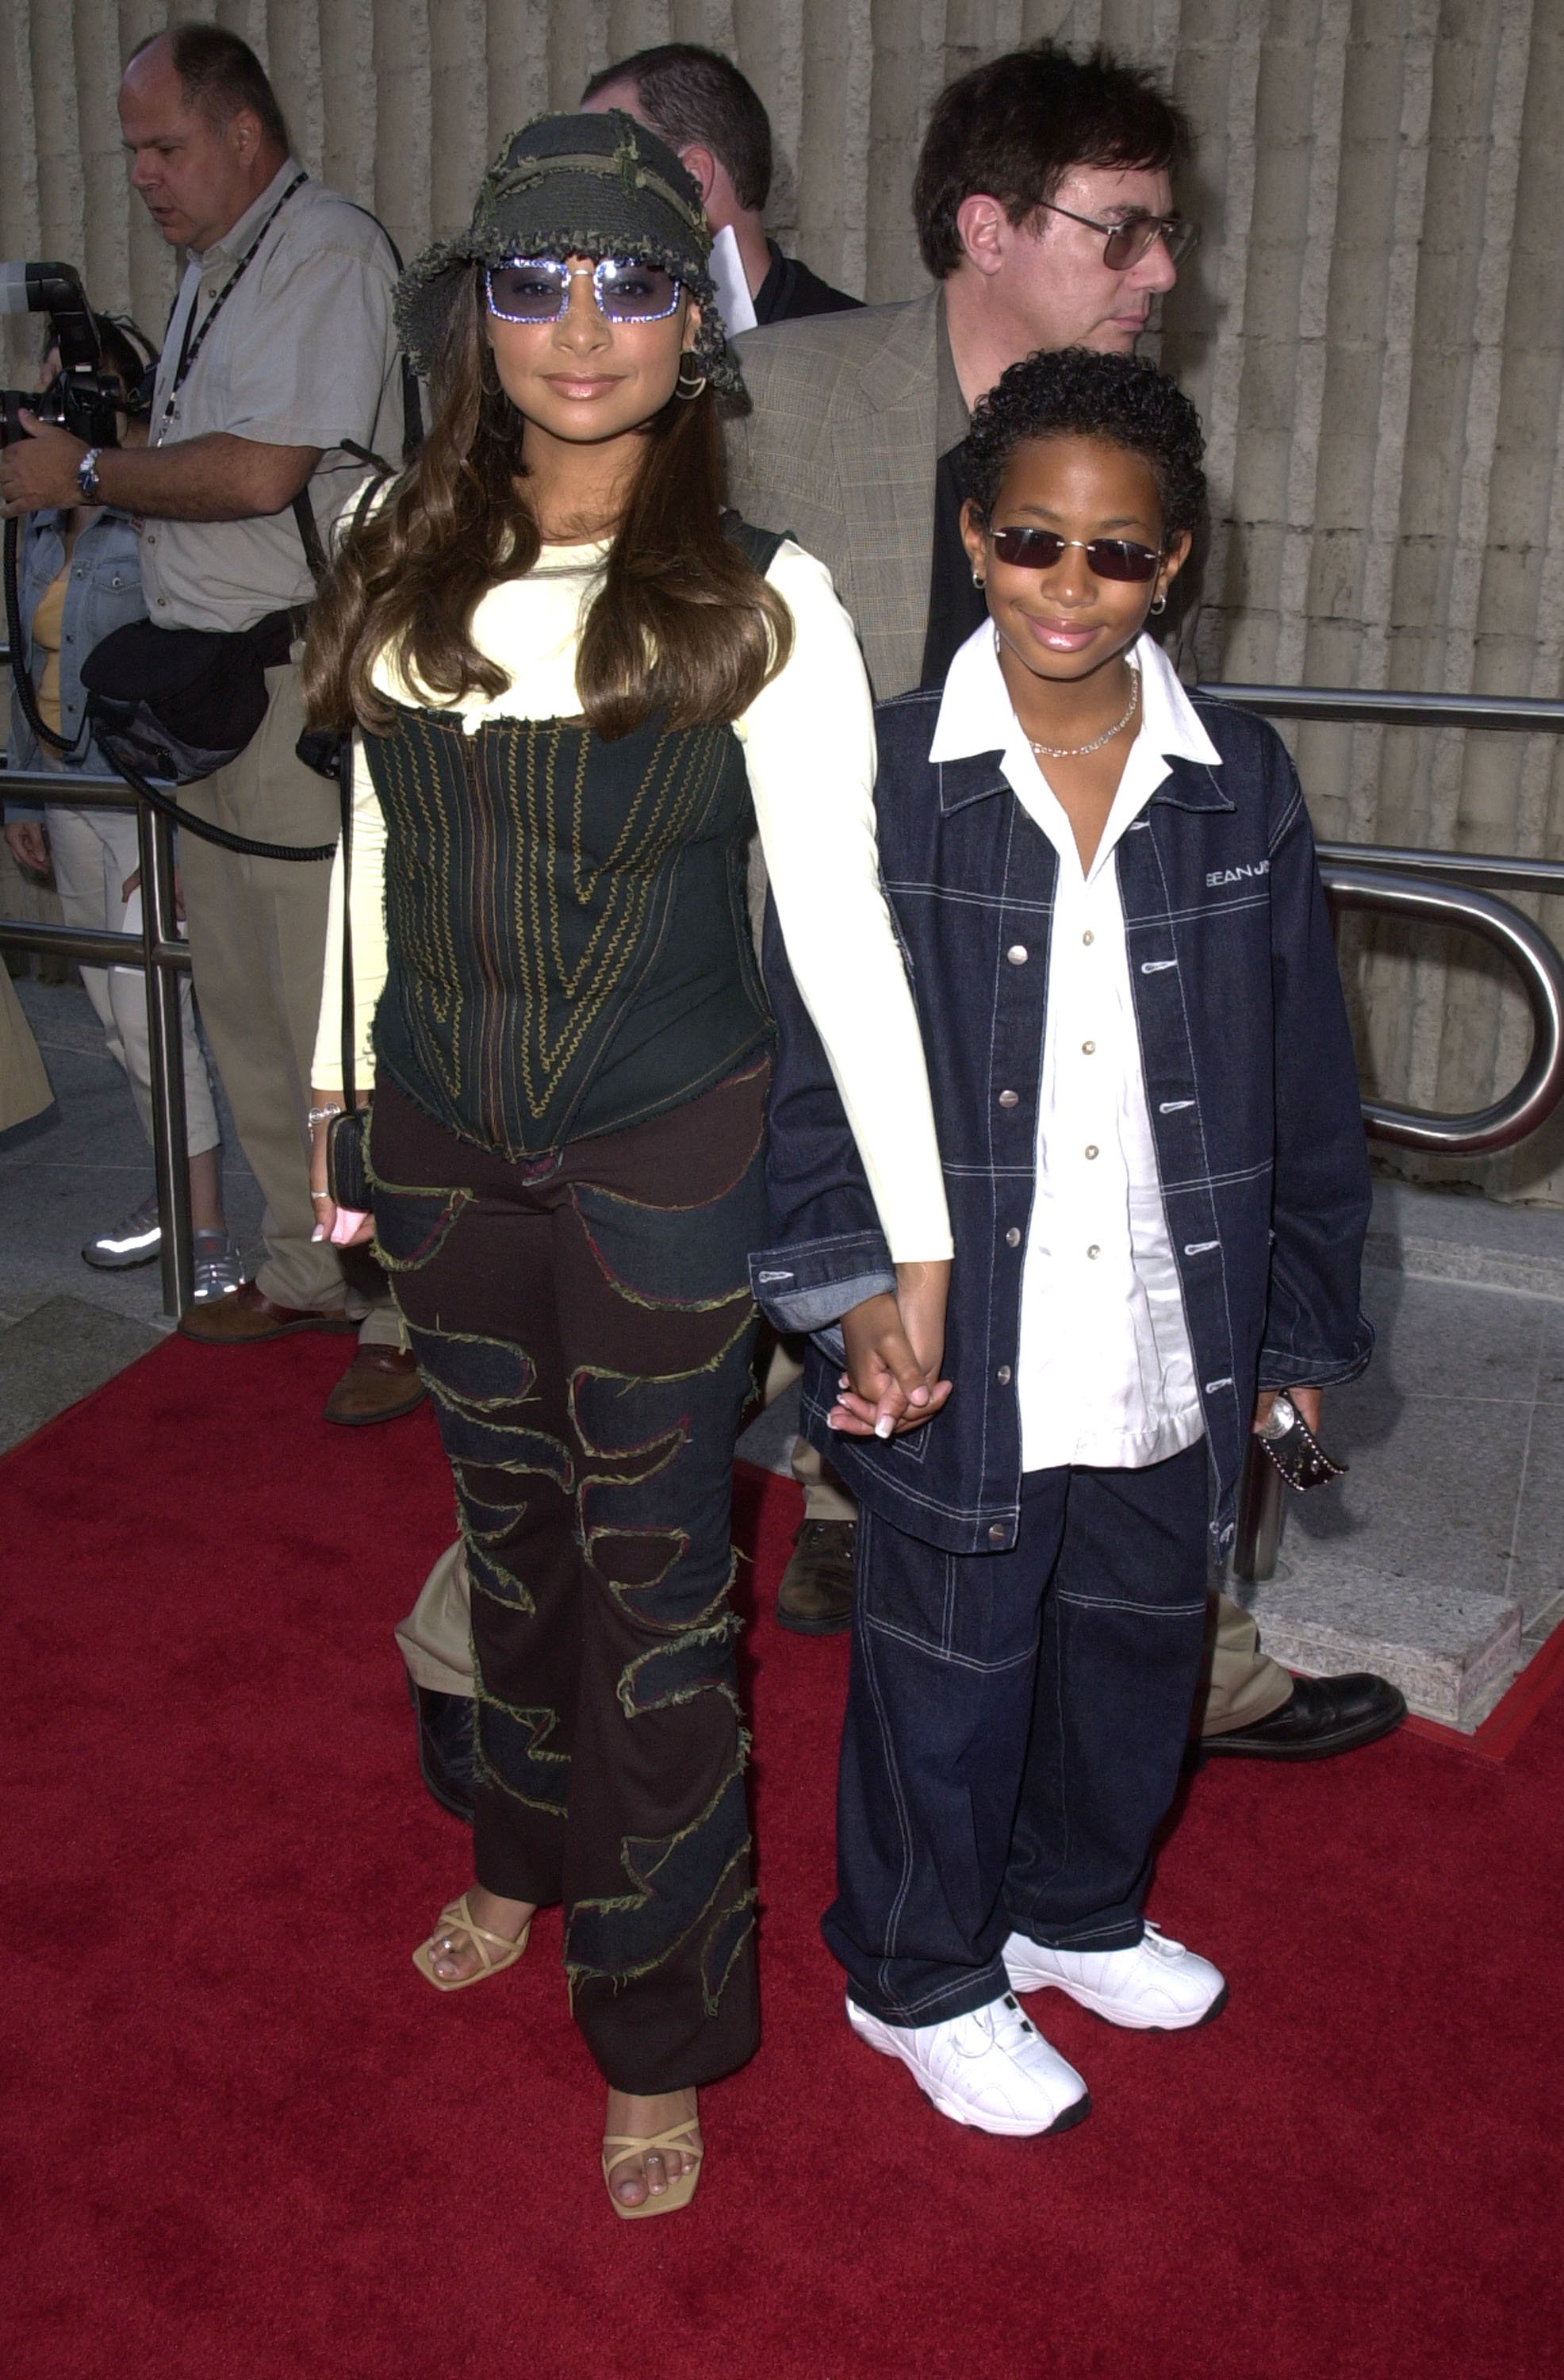 Raven-Symone & Brother Blaize at Avco Cinemas in Westwood, on June 19, 2001, California, United States. | Source: Getty Images